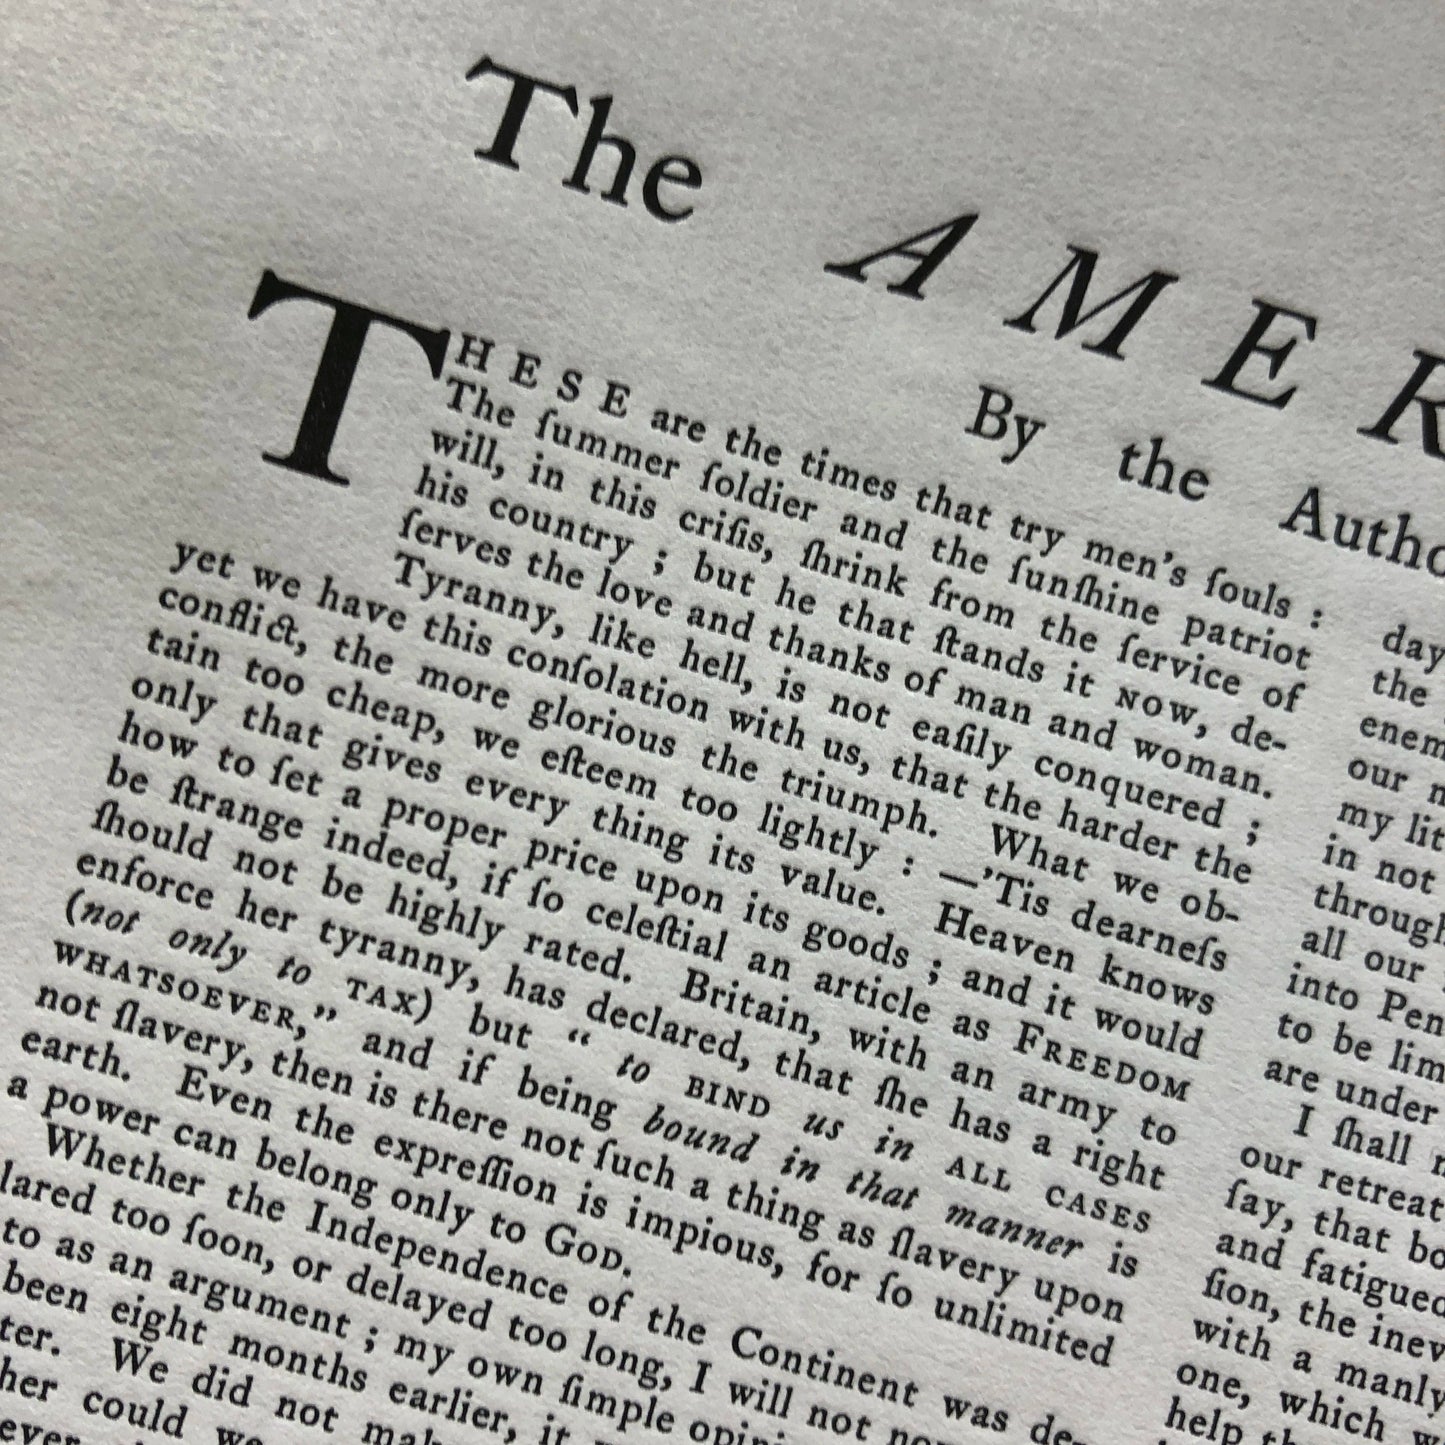 Close-up of "The American Crisis" by Thomas Paine - "These are the times that try men’s souls" - Broadside printed in Boston from The History List store